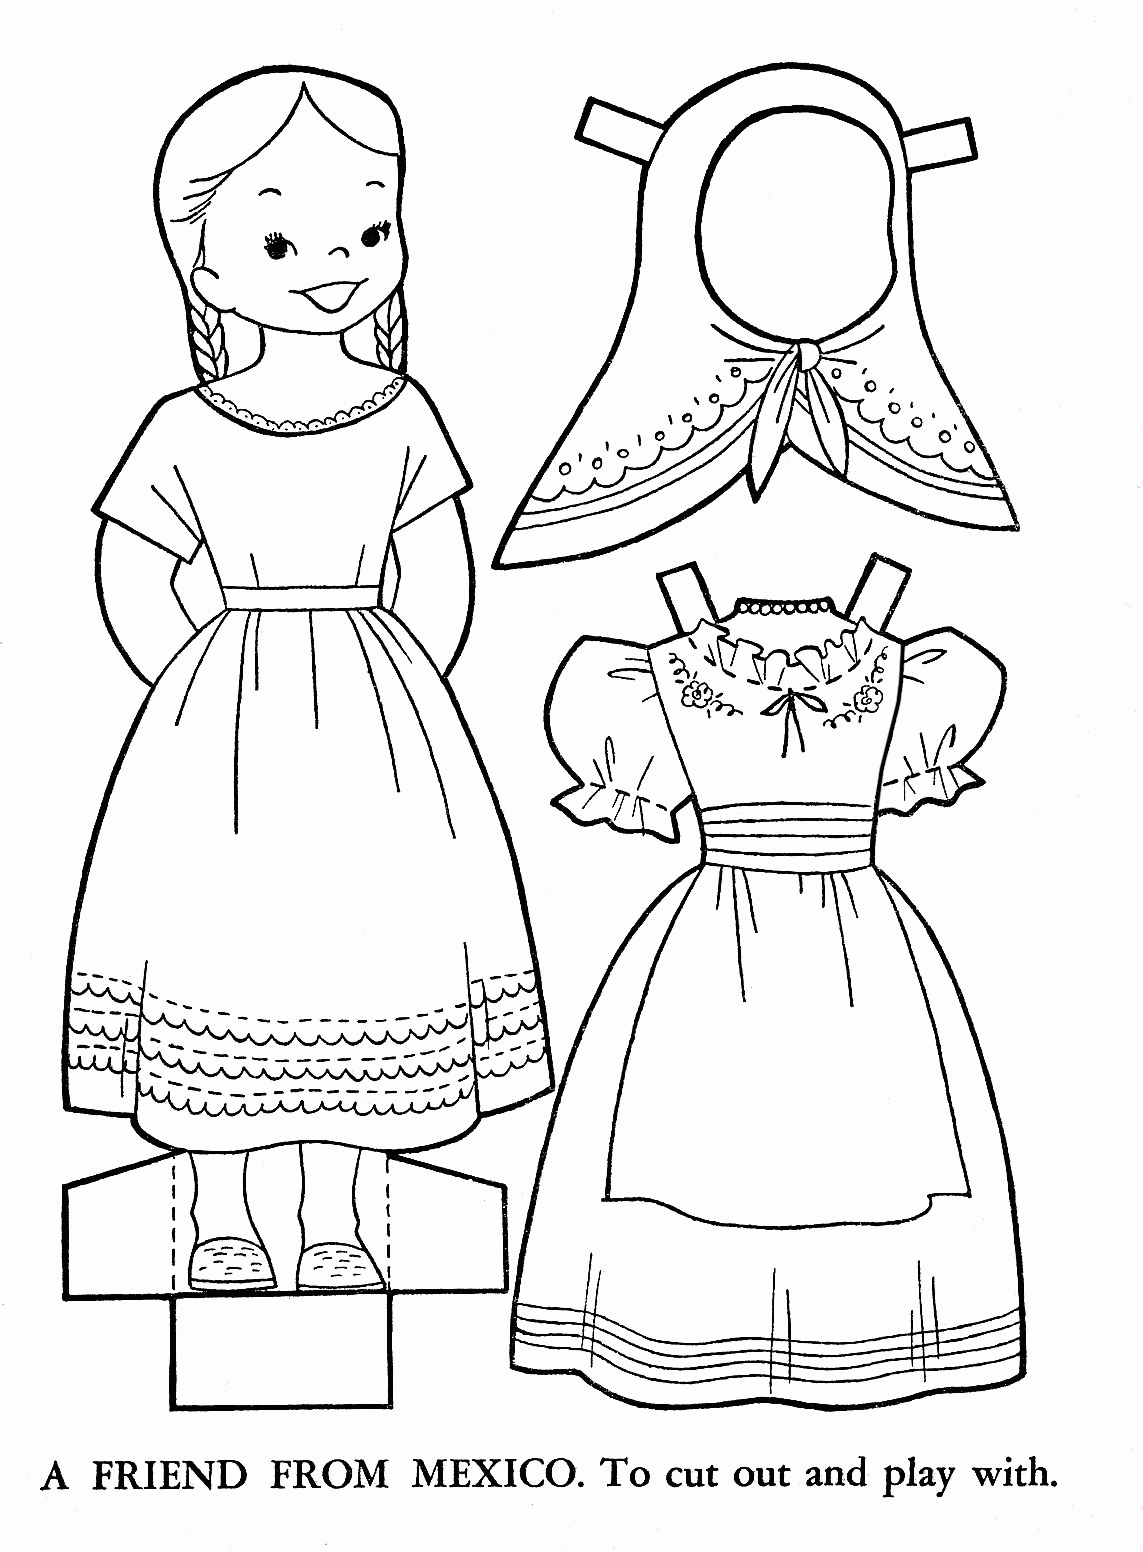 Preschool Christmas In Mexico Coloring Page Free Printable